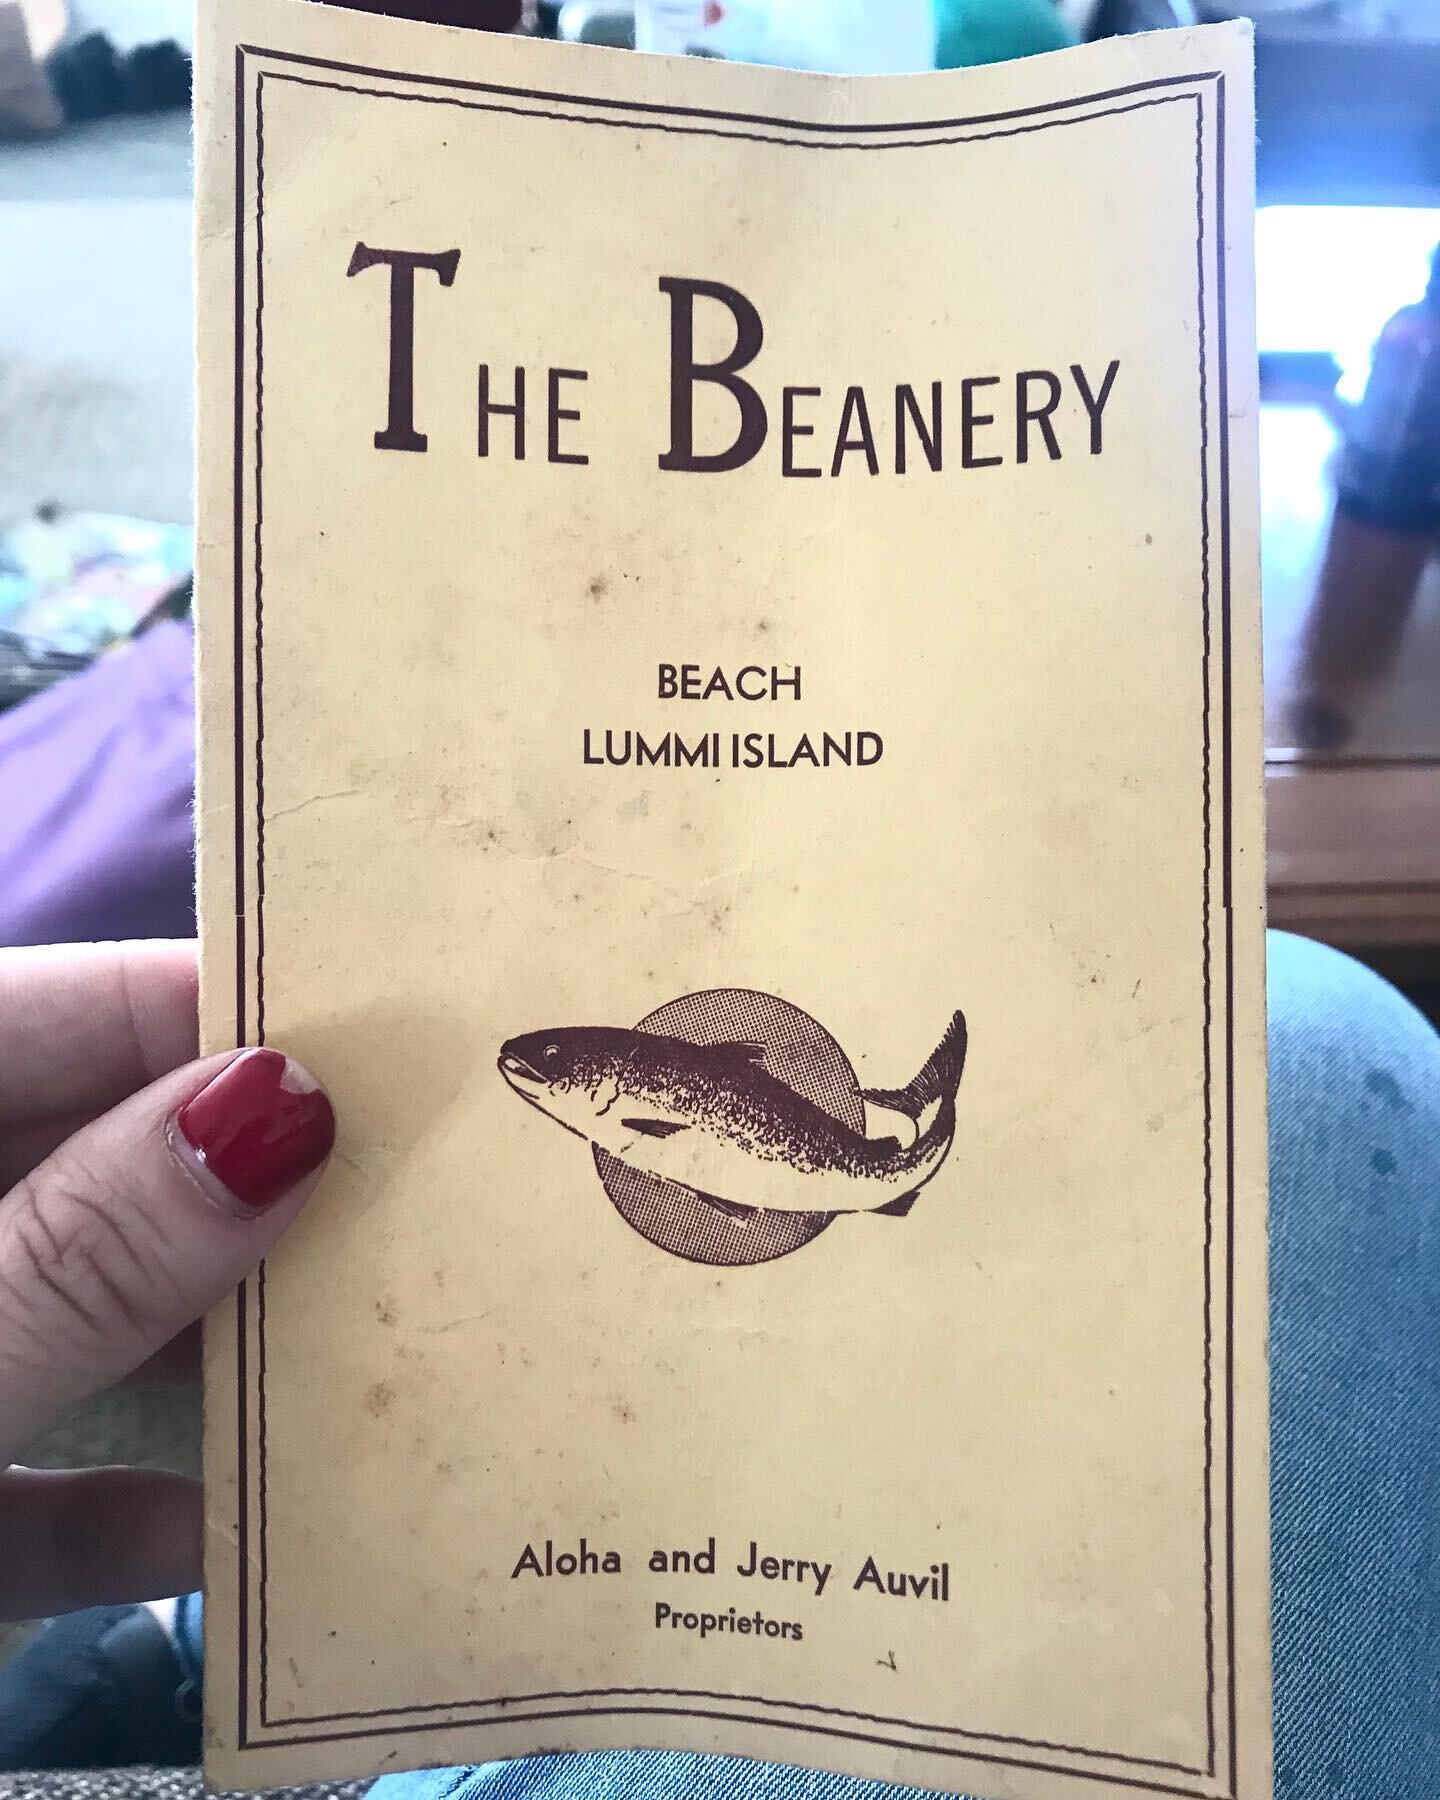 We were looking through old photos at my Great Aunt&rsquo;s house a while back, and found this old menu from The Beanery. 

Our Great-grandma was working there, and that&rsquo;s how she came to meet our Great-Grandpa!  We&rsquo;ll have the full story